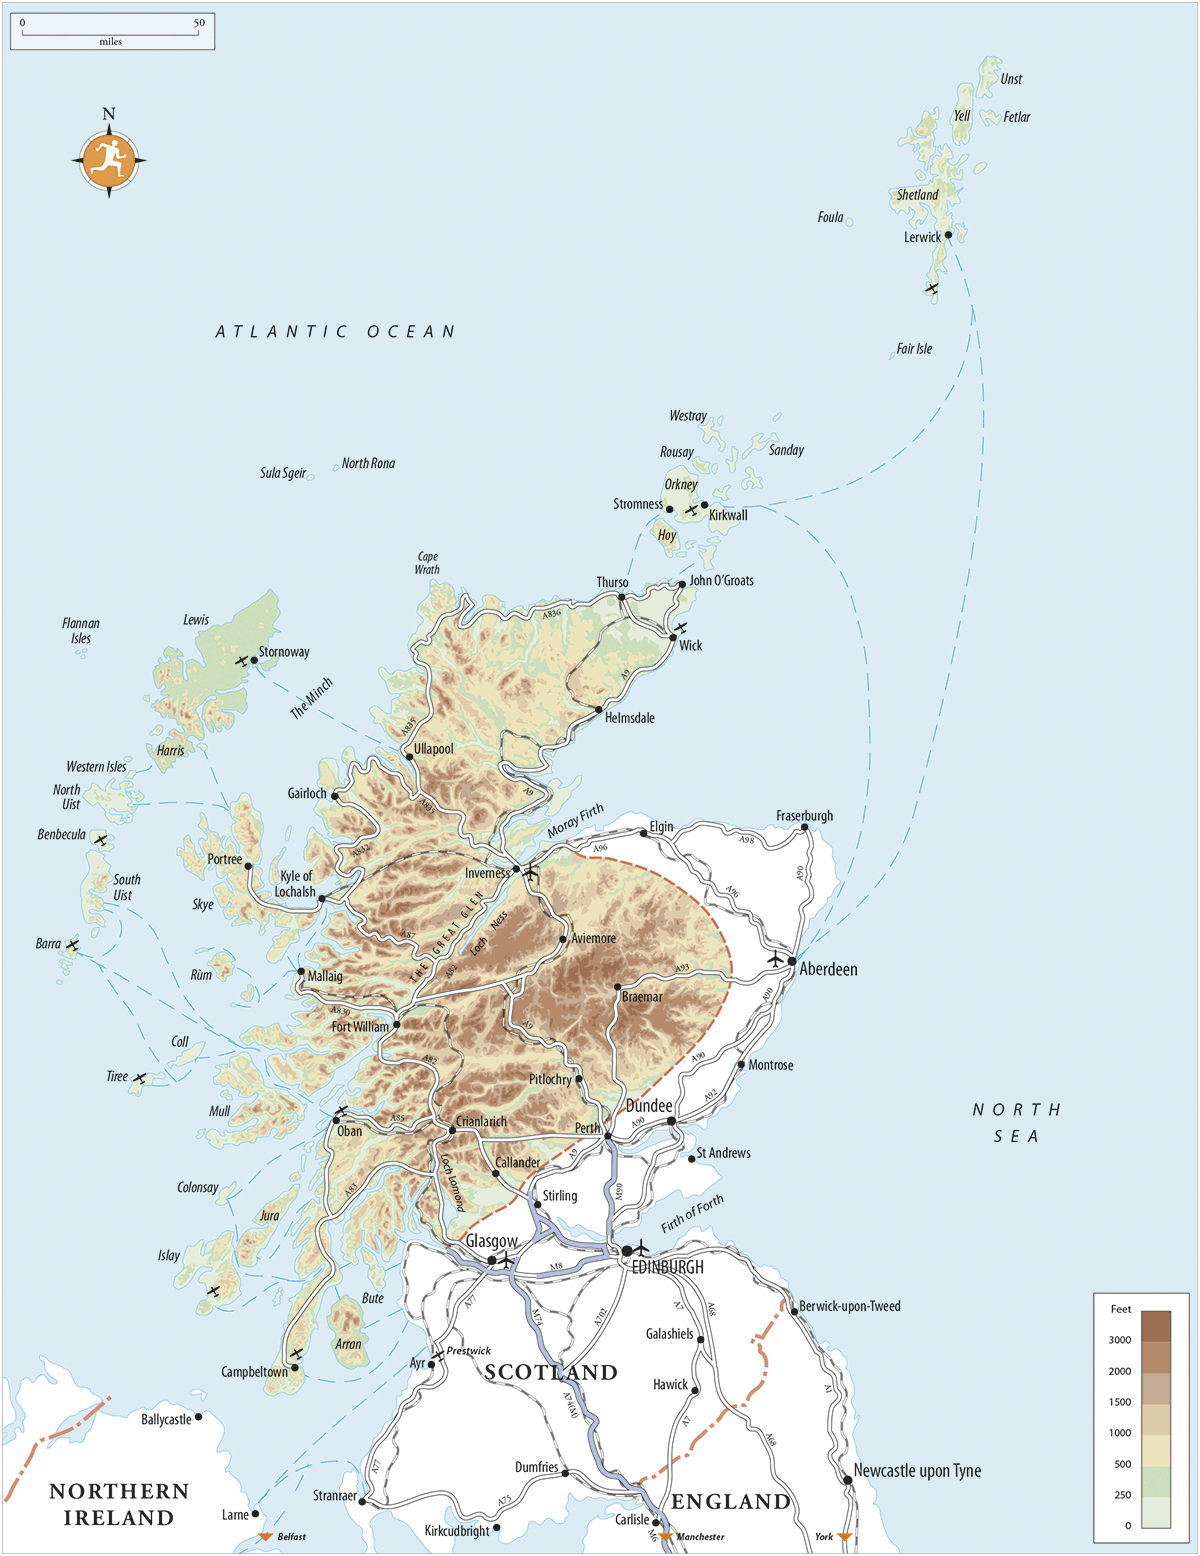 Rough Guide Snapshot Scottish Highlands and Islands Skye and the Small Isles - photo 5